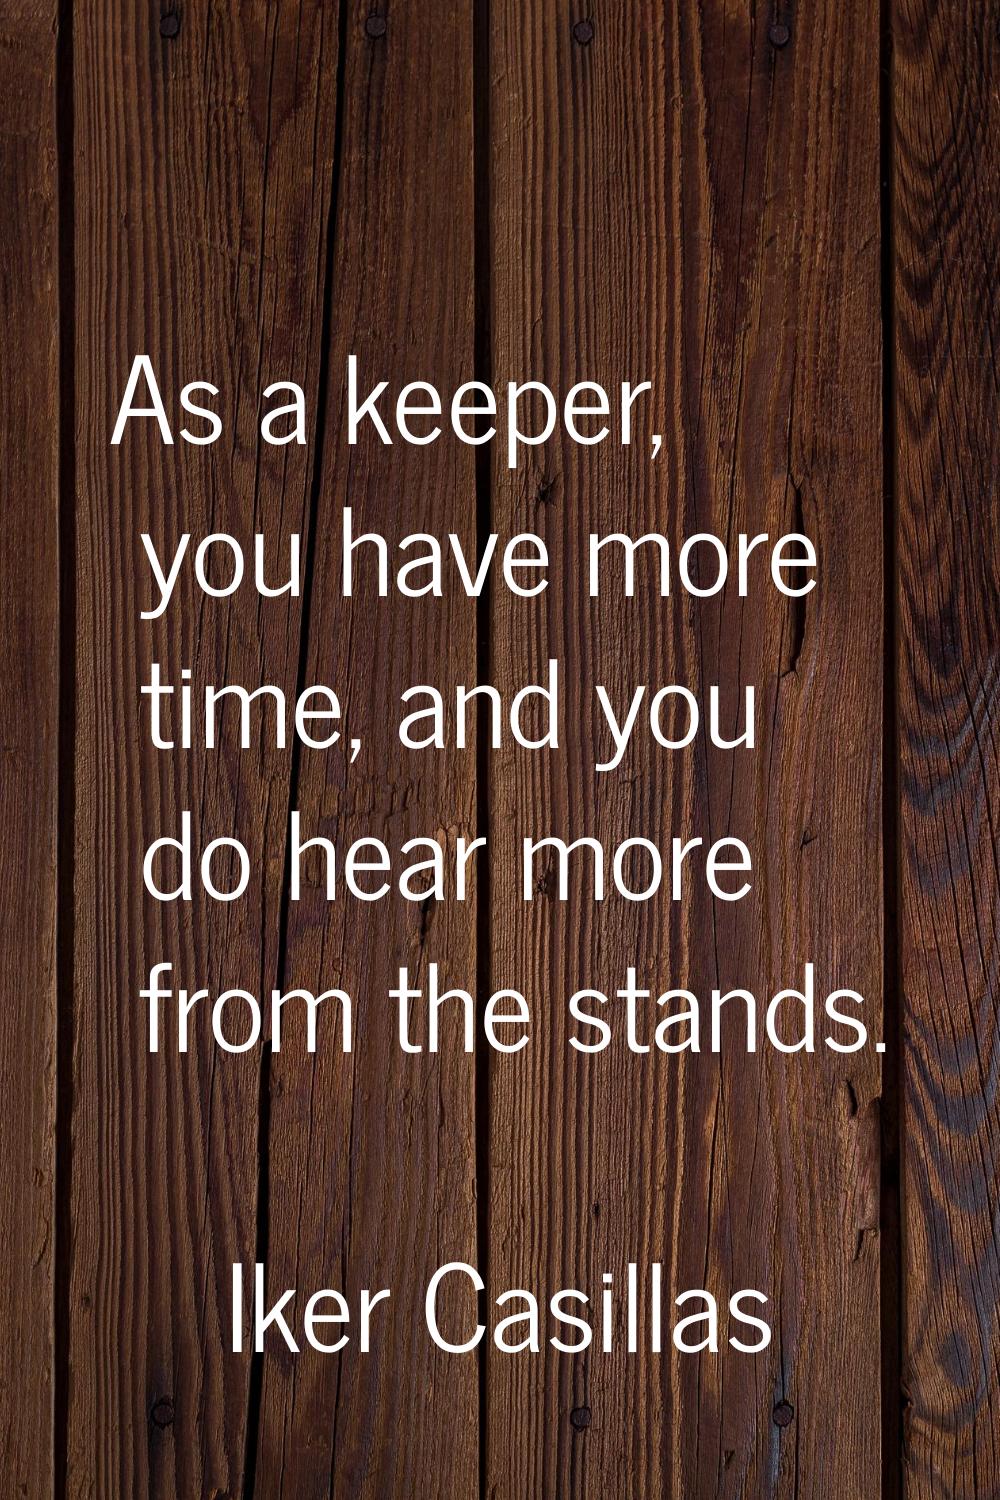 As a keeper, you have more time, and you do hear more from the stands.